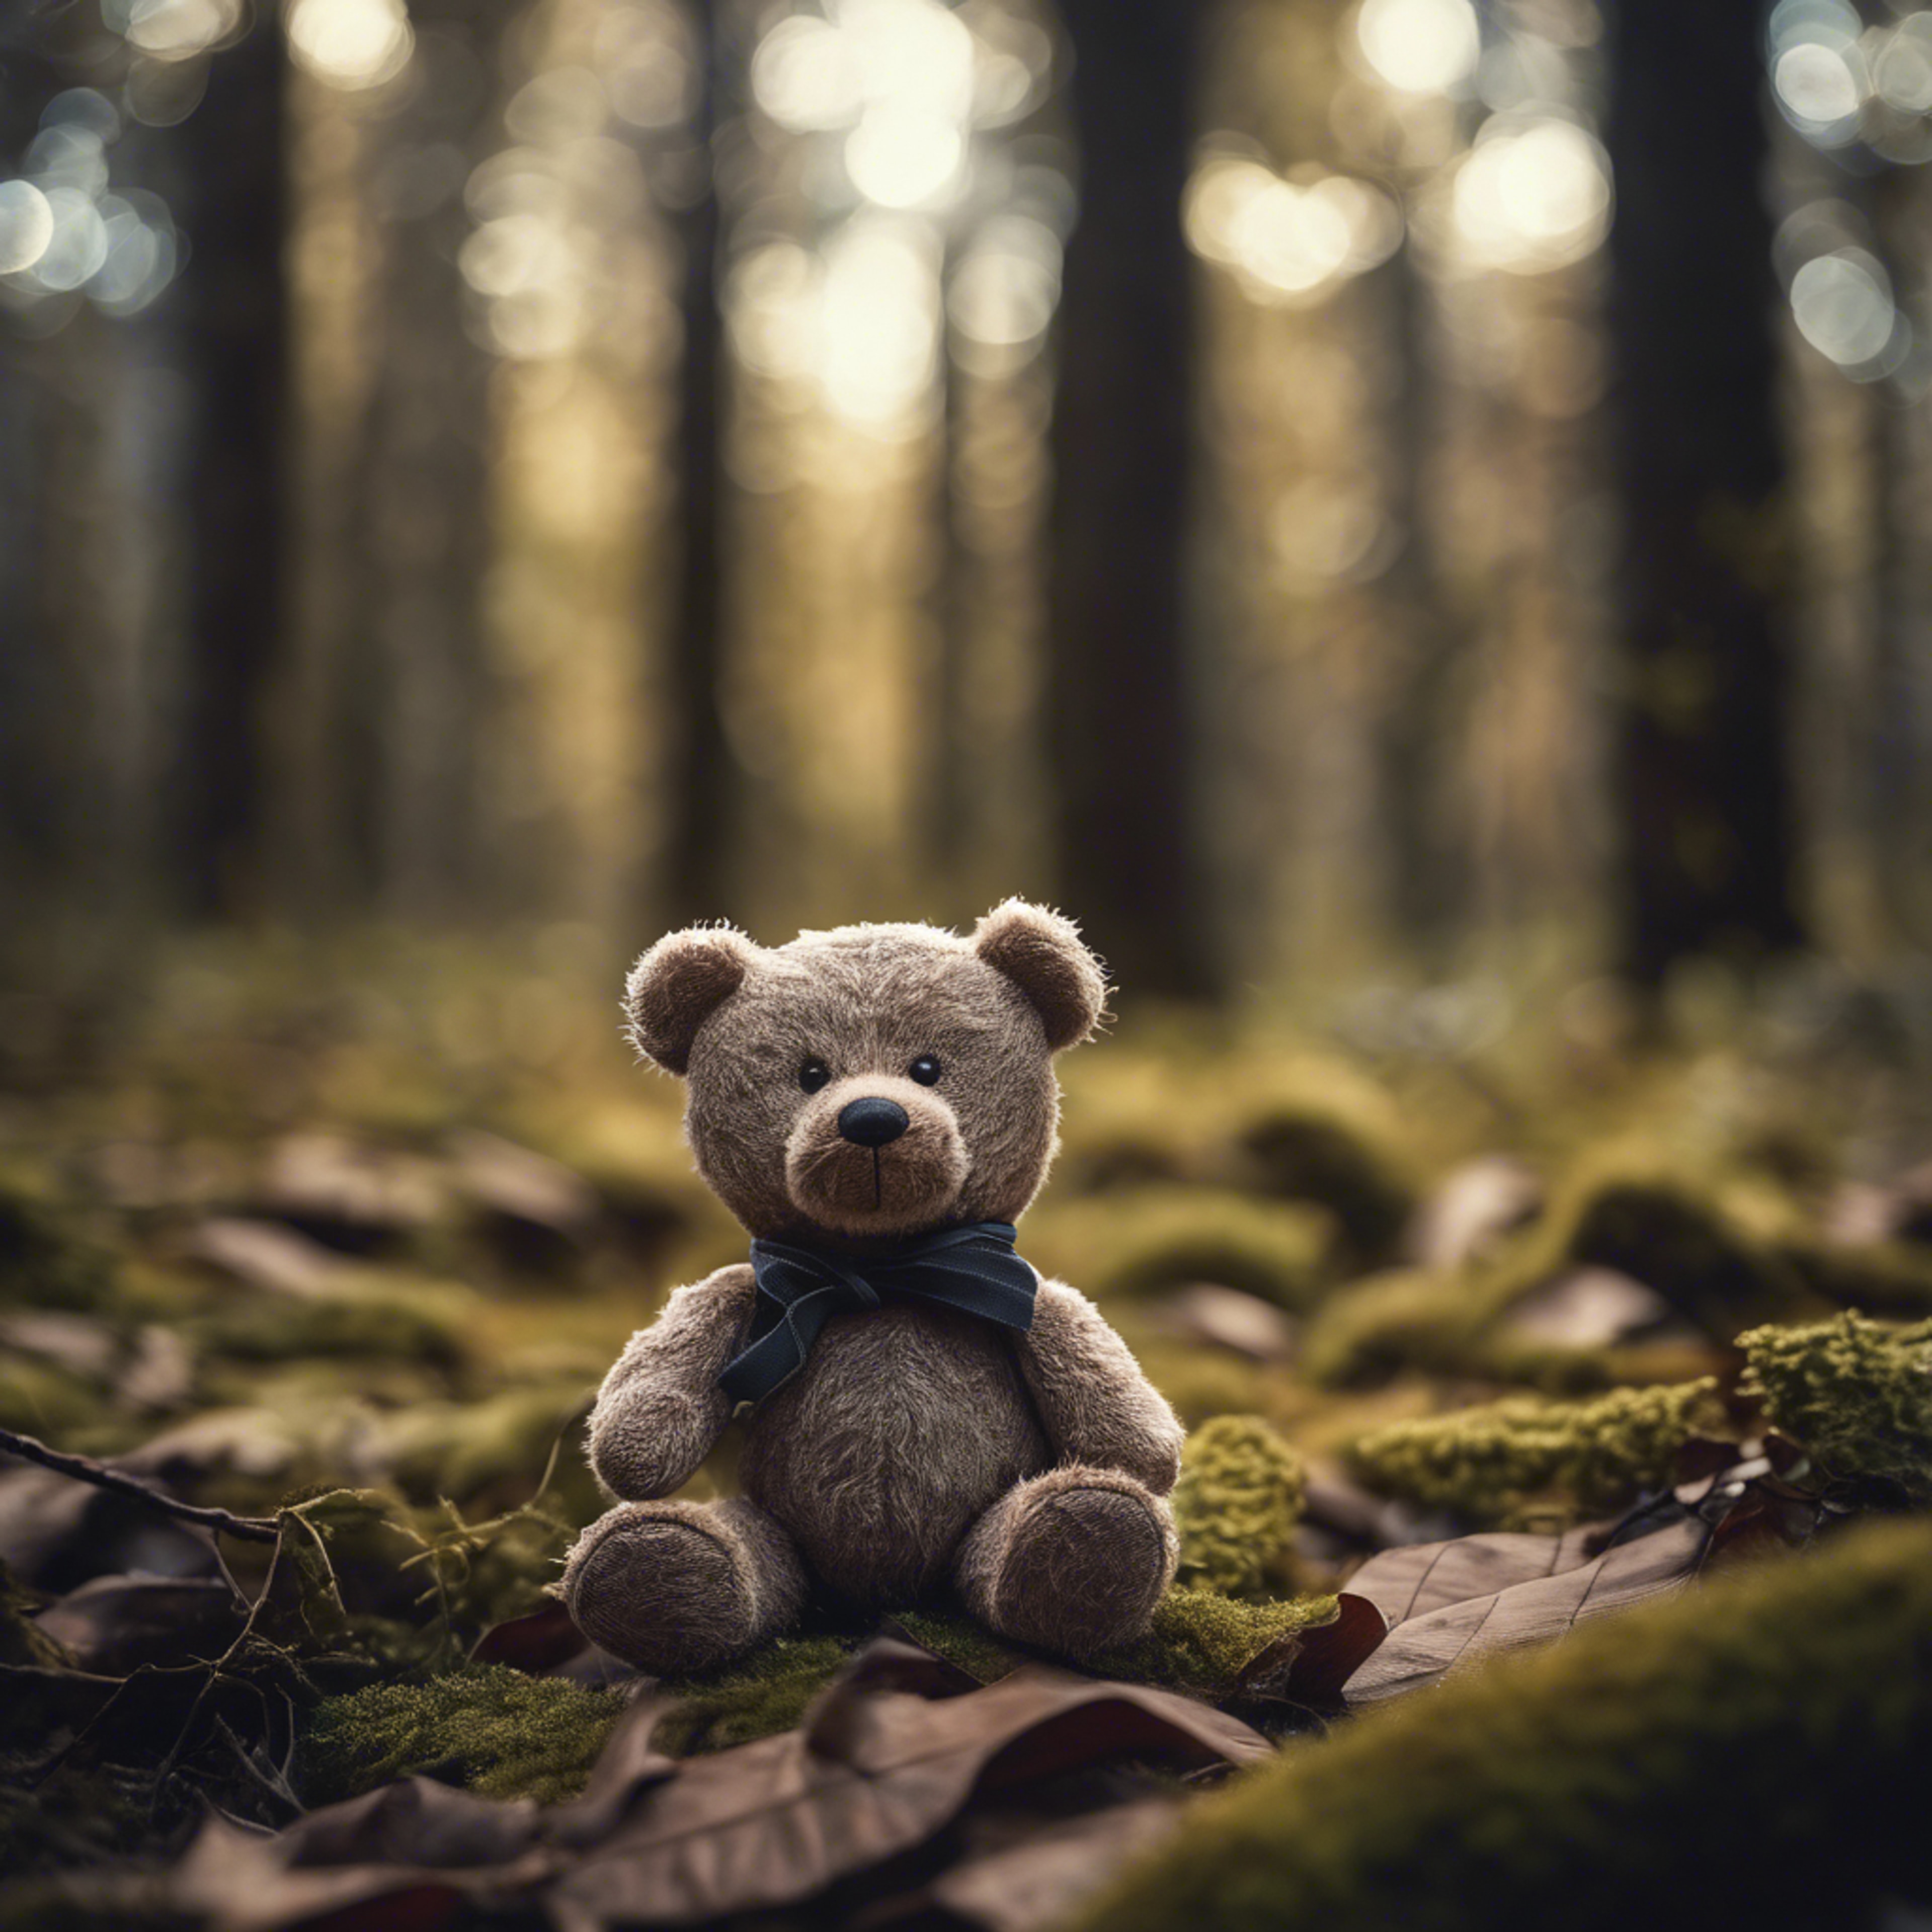 A teddy bear lost and alone in a dark forest.壁紙[4d225efade314682baea]